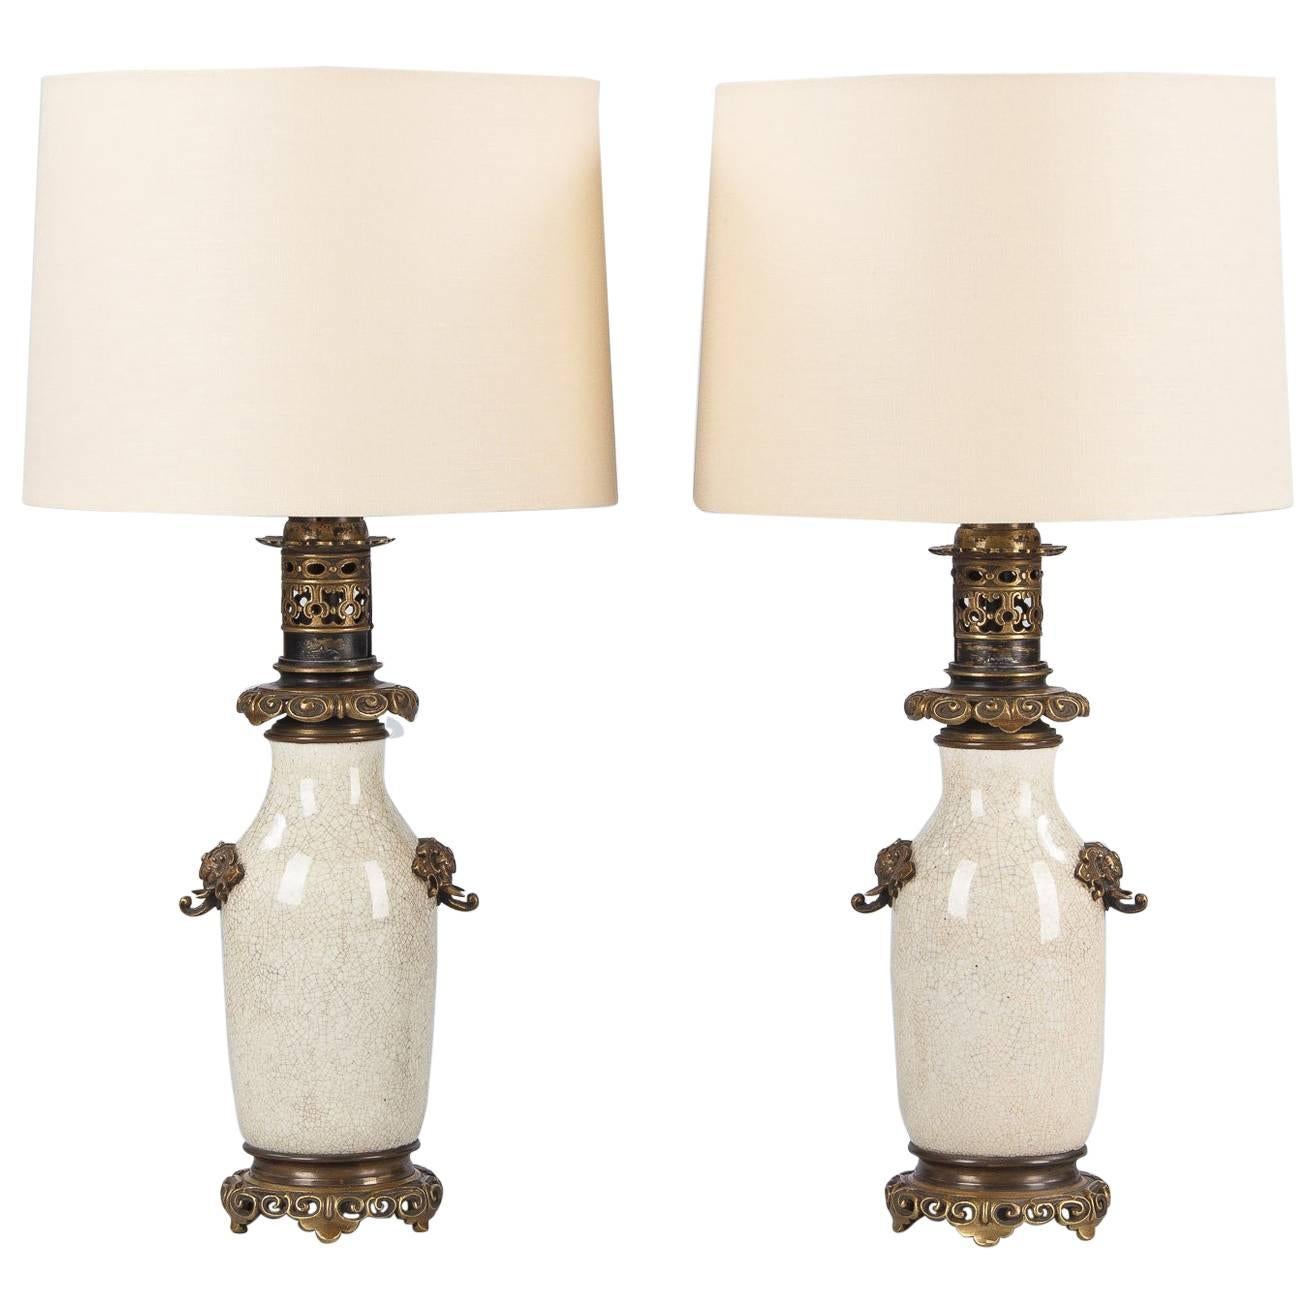 Pair of French Crackle Glaze Ceramic Lamps, Late 1800s